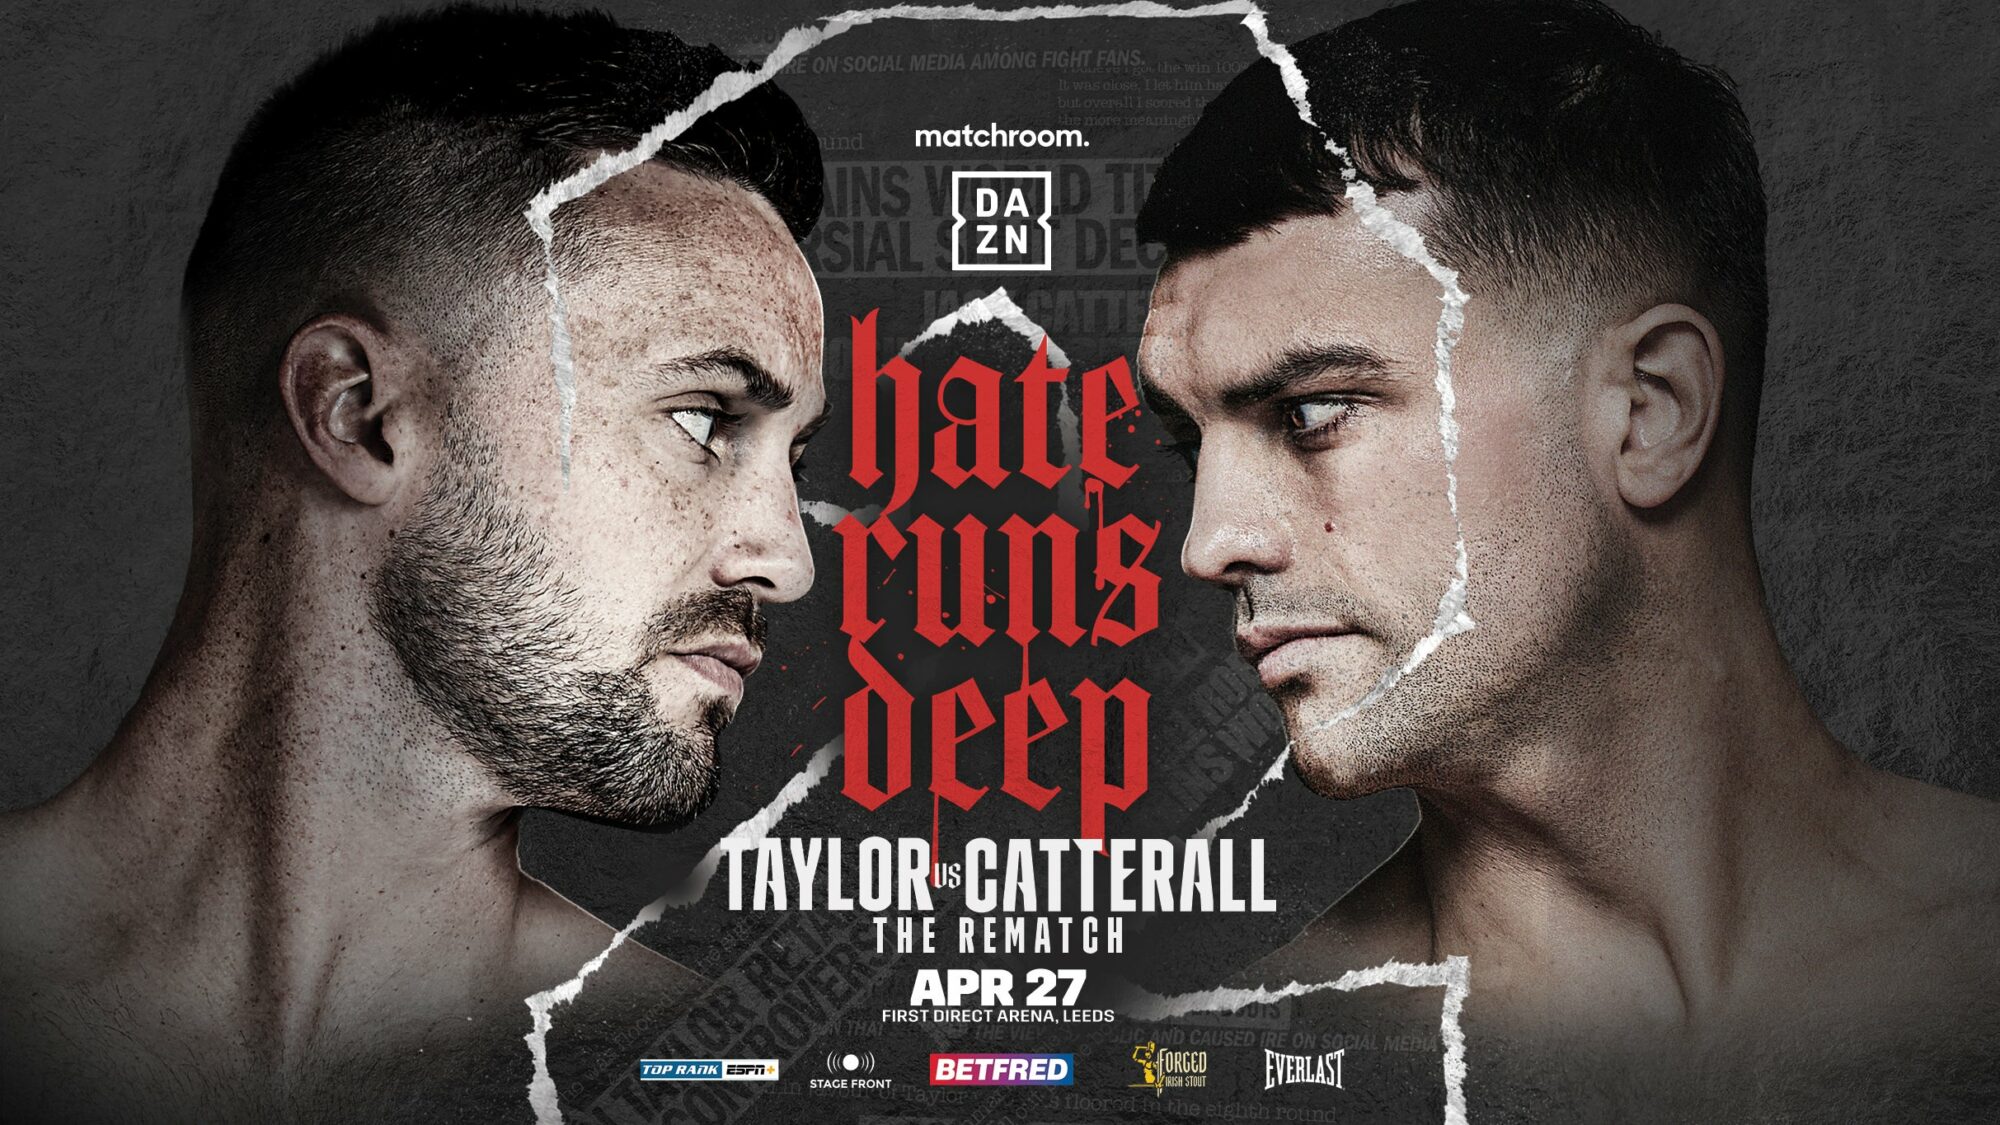 Image name Matchroom Boxing Josh Taylor vs Jack Catterall at First Direct Arena Leeds the 4 image from the post Matchroom Boxing: Josh Taylor vs Jack Catterall at First Direct Arena, Leeds in Yorkshire.com.